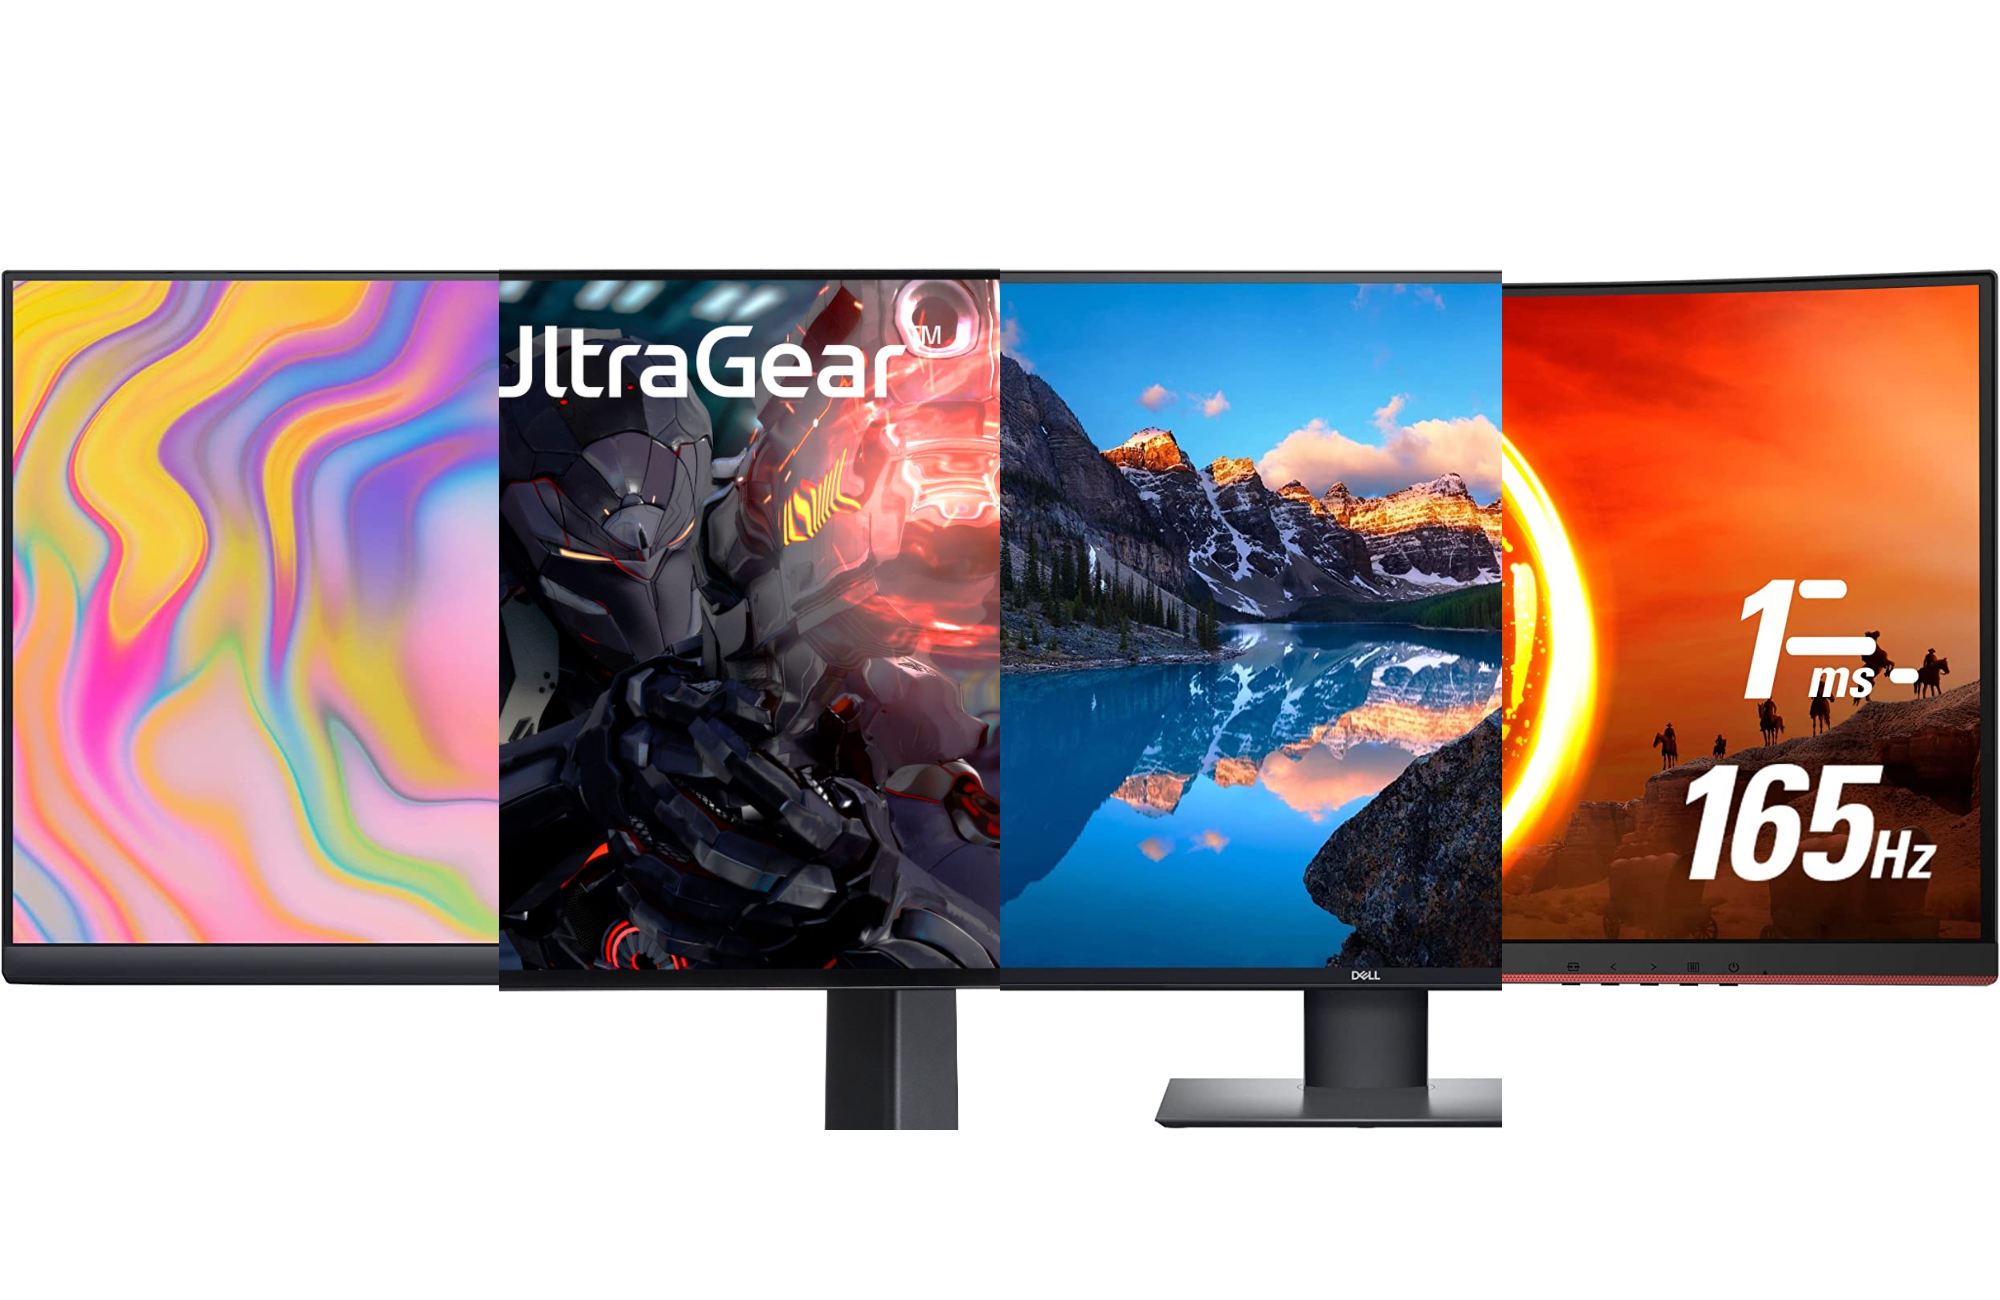 I review monitors for a living – 2K resolution or better is necessary for  work